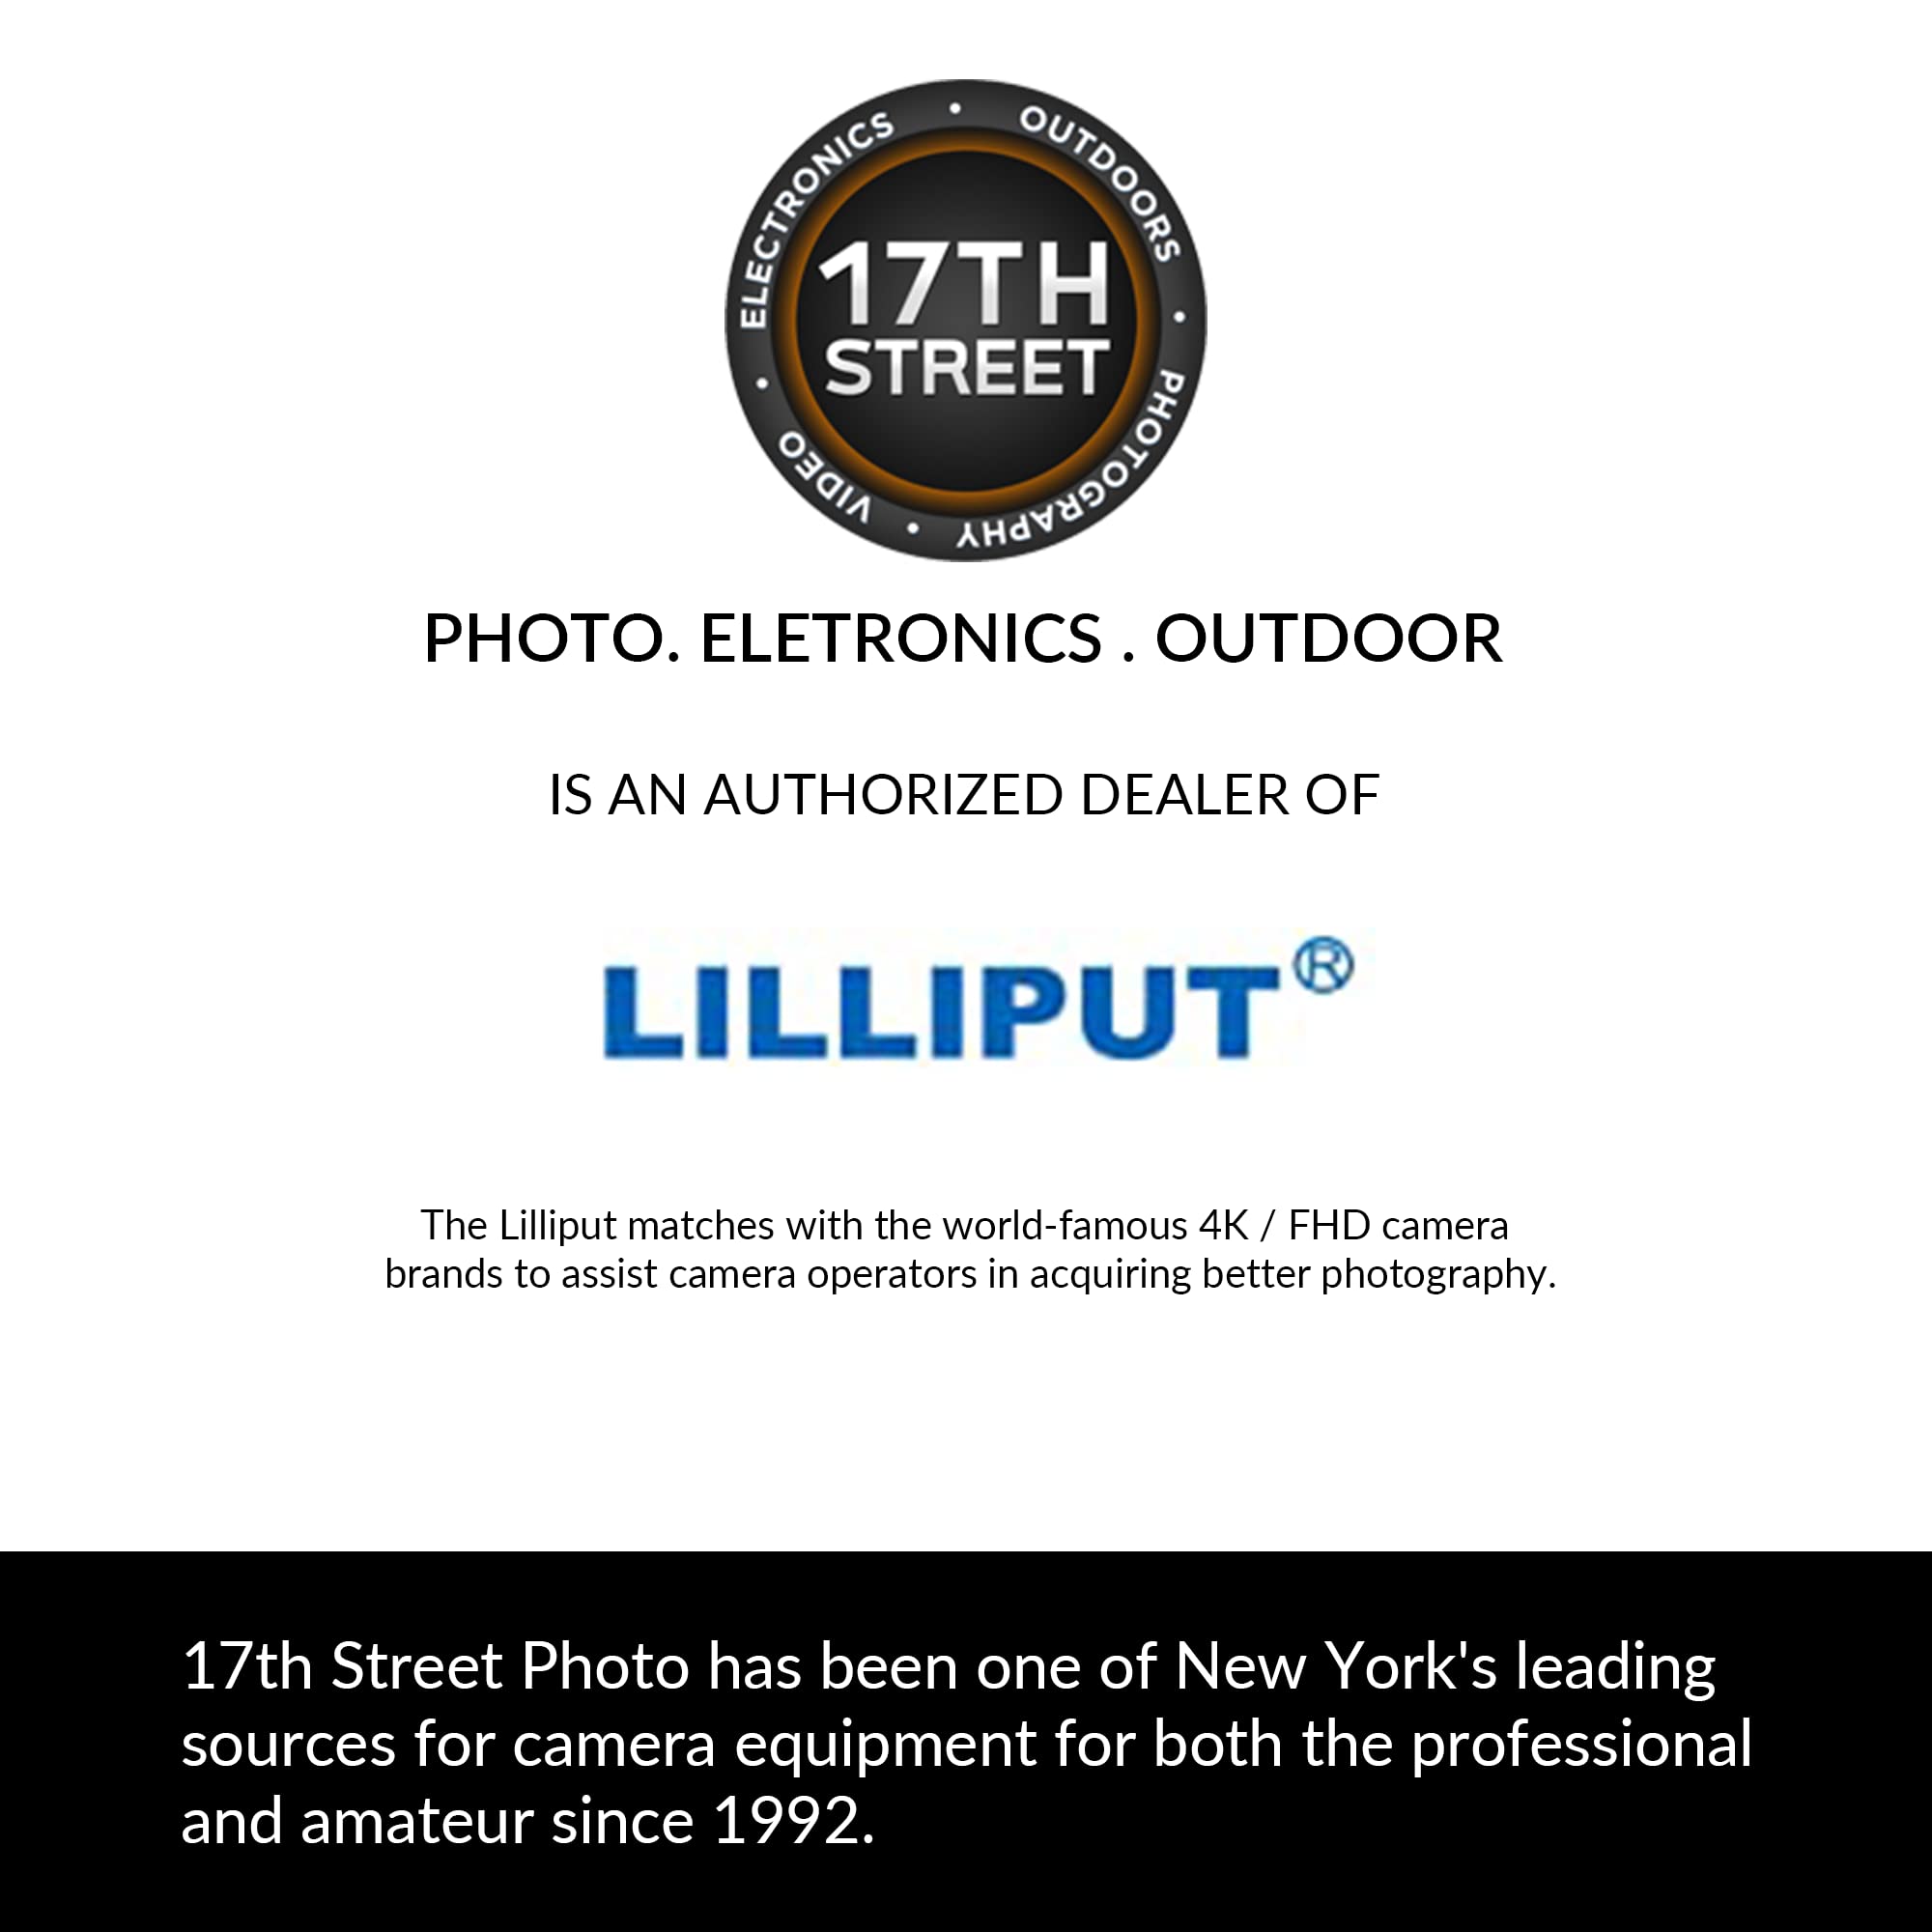 Lilliput A11 10.1-Inch 4K Photo and Video Portable Monitor | 1920x1200 Full HD Display Monitors with HDMI 1.4b in/Out, SmallRig Camera Hot Shoe Mount, Battery & Charger Bundle Set